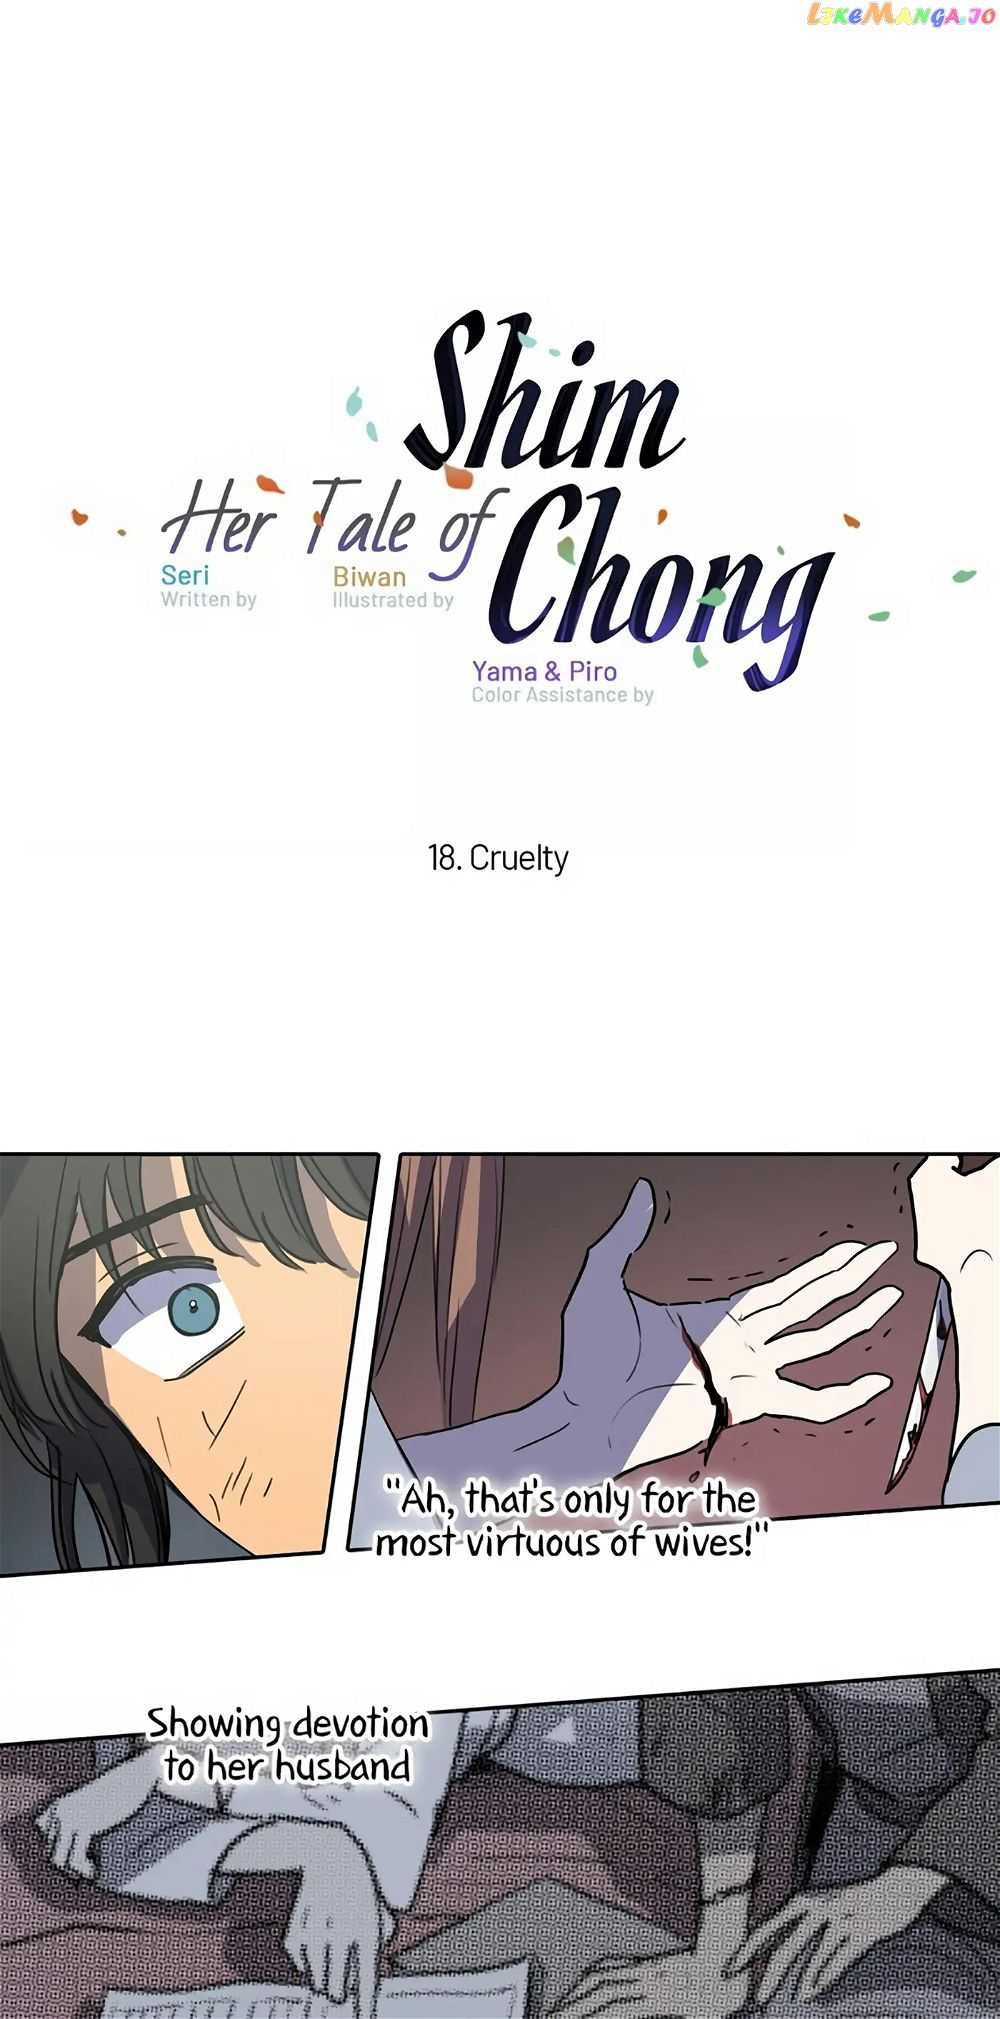 Her Tale of Shim Chong - chapter 18 - #1